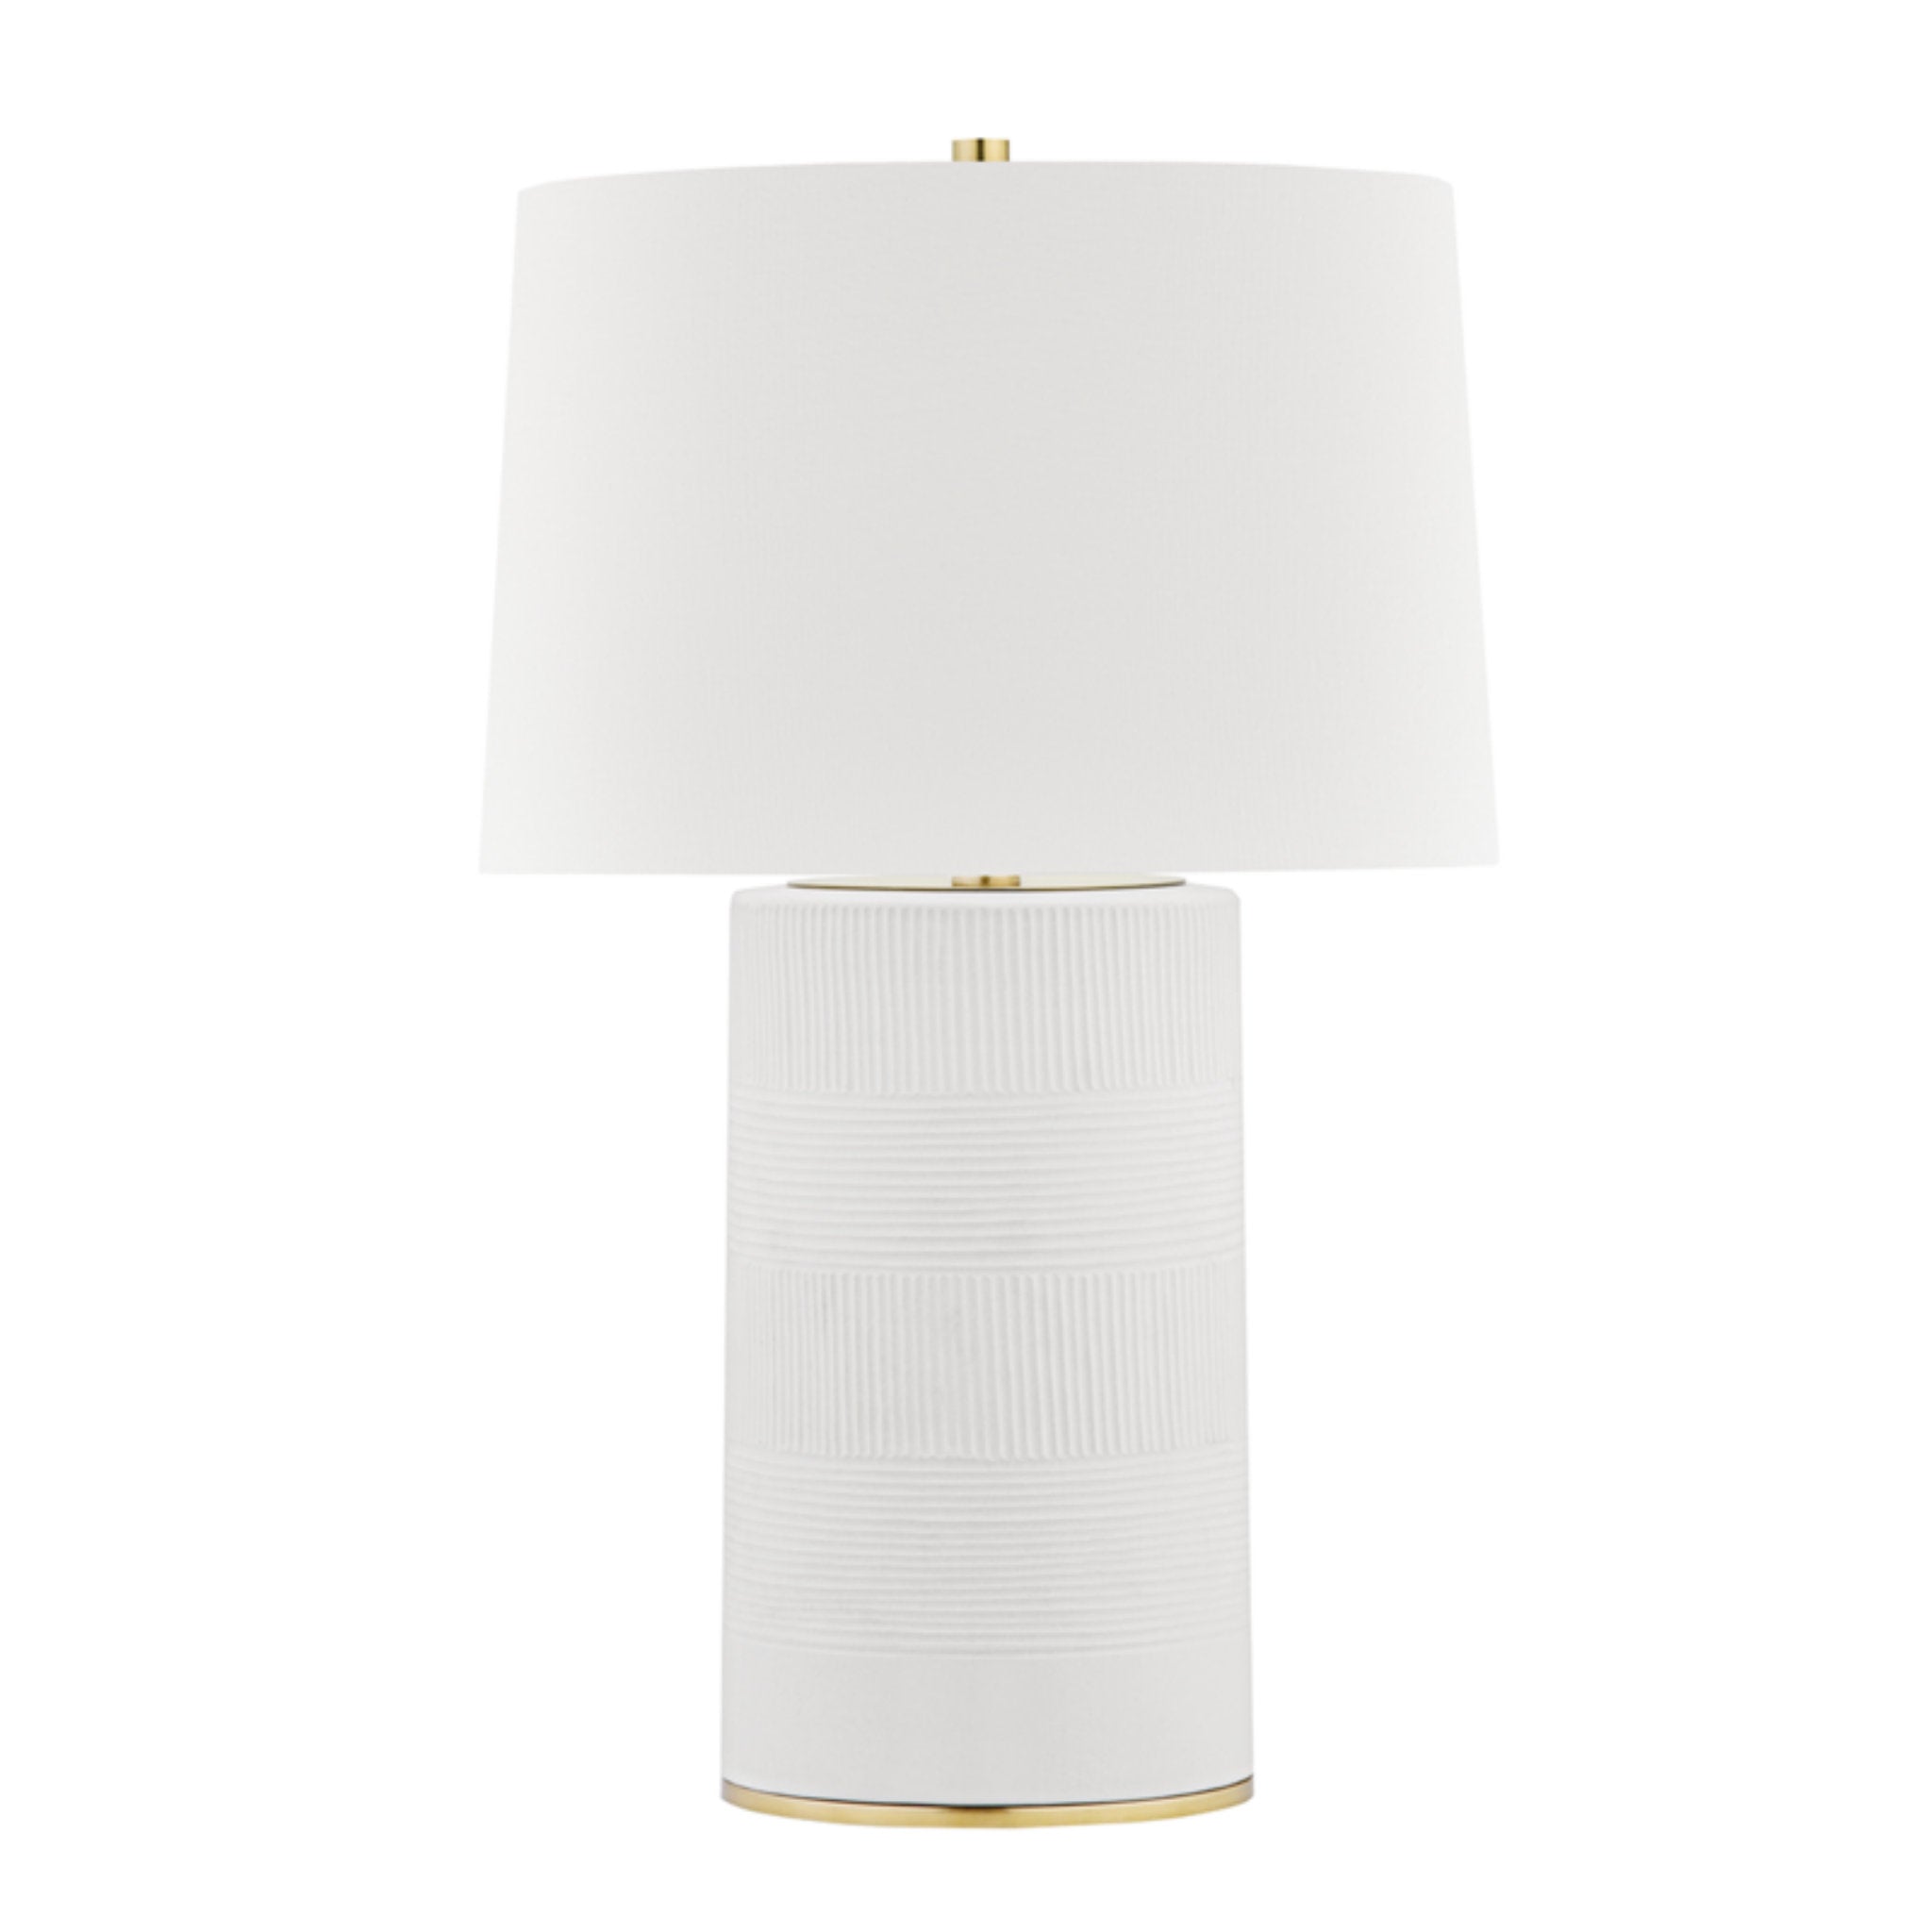 Borneo 1 Light Table Lamp in Aged Brass/soft Off White